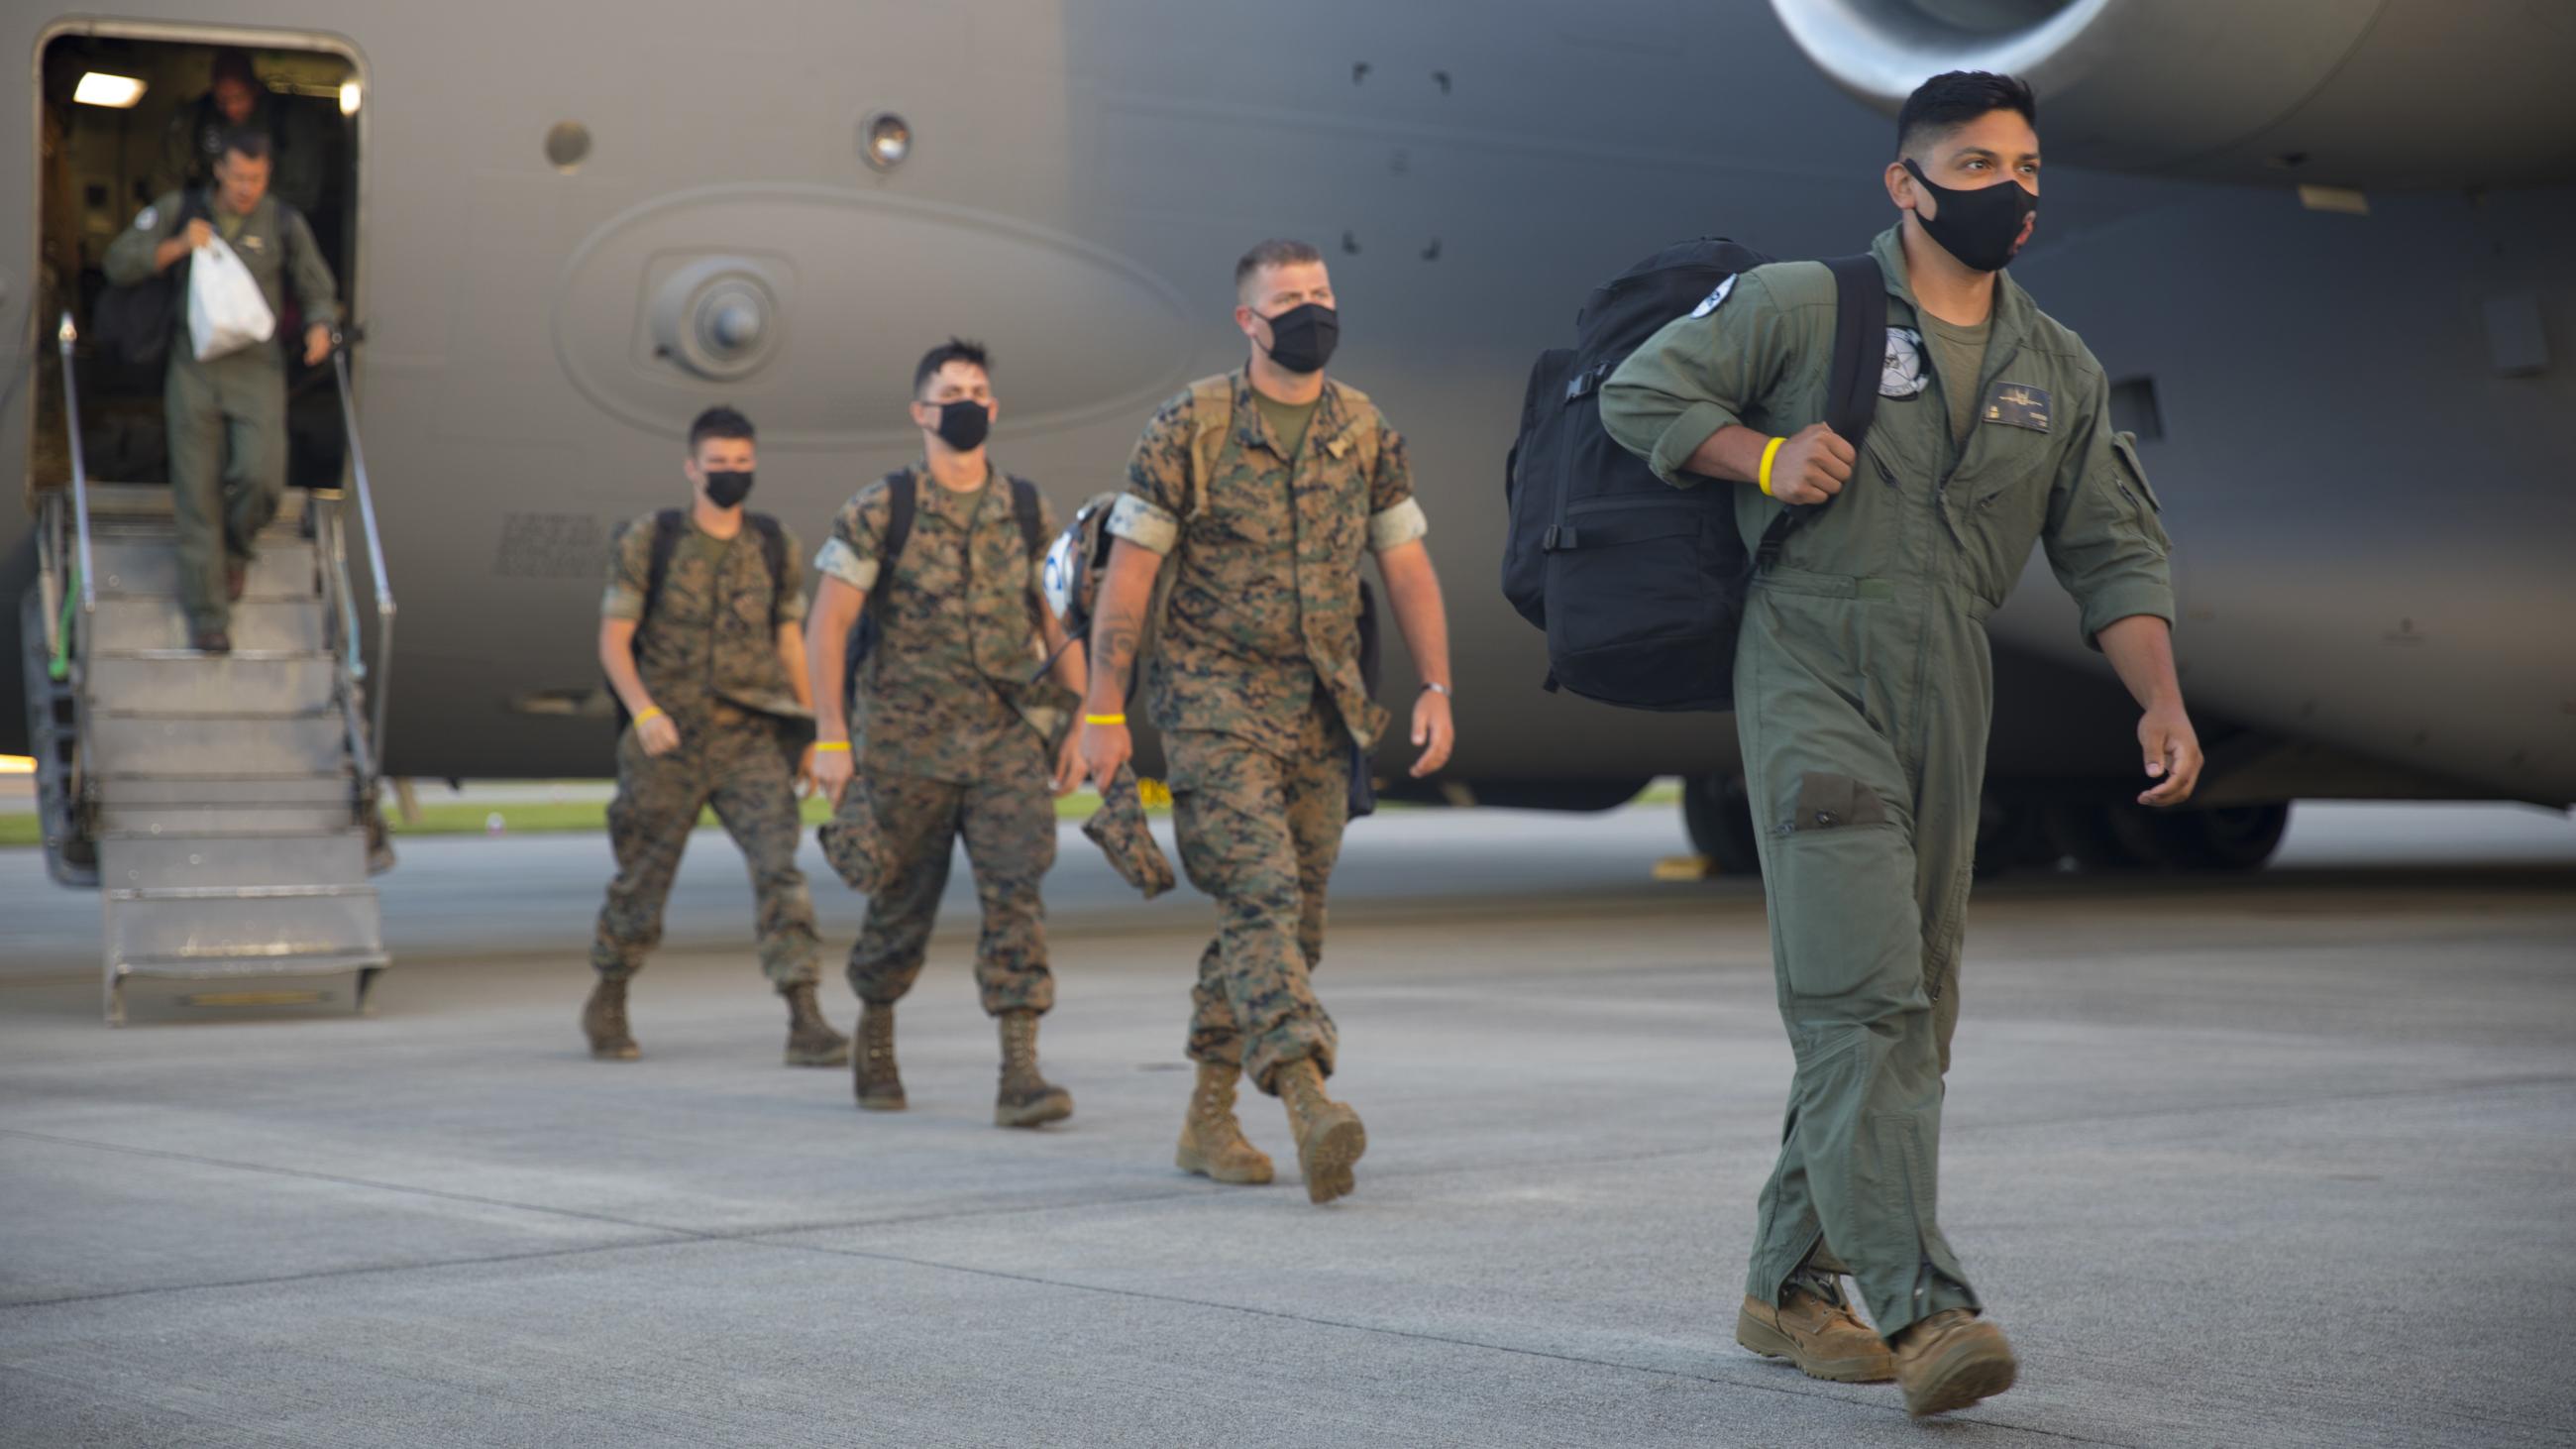 Four uniformed U.S. Marines file out of a grey personnel carrier aircraft.